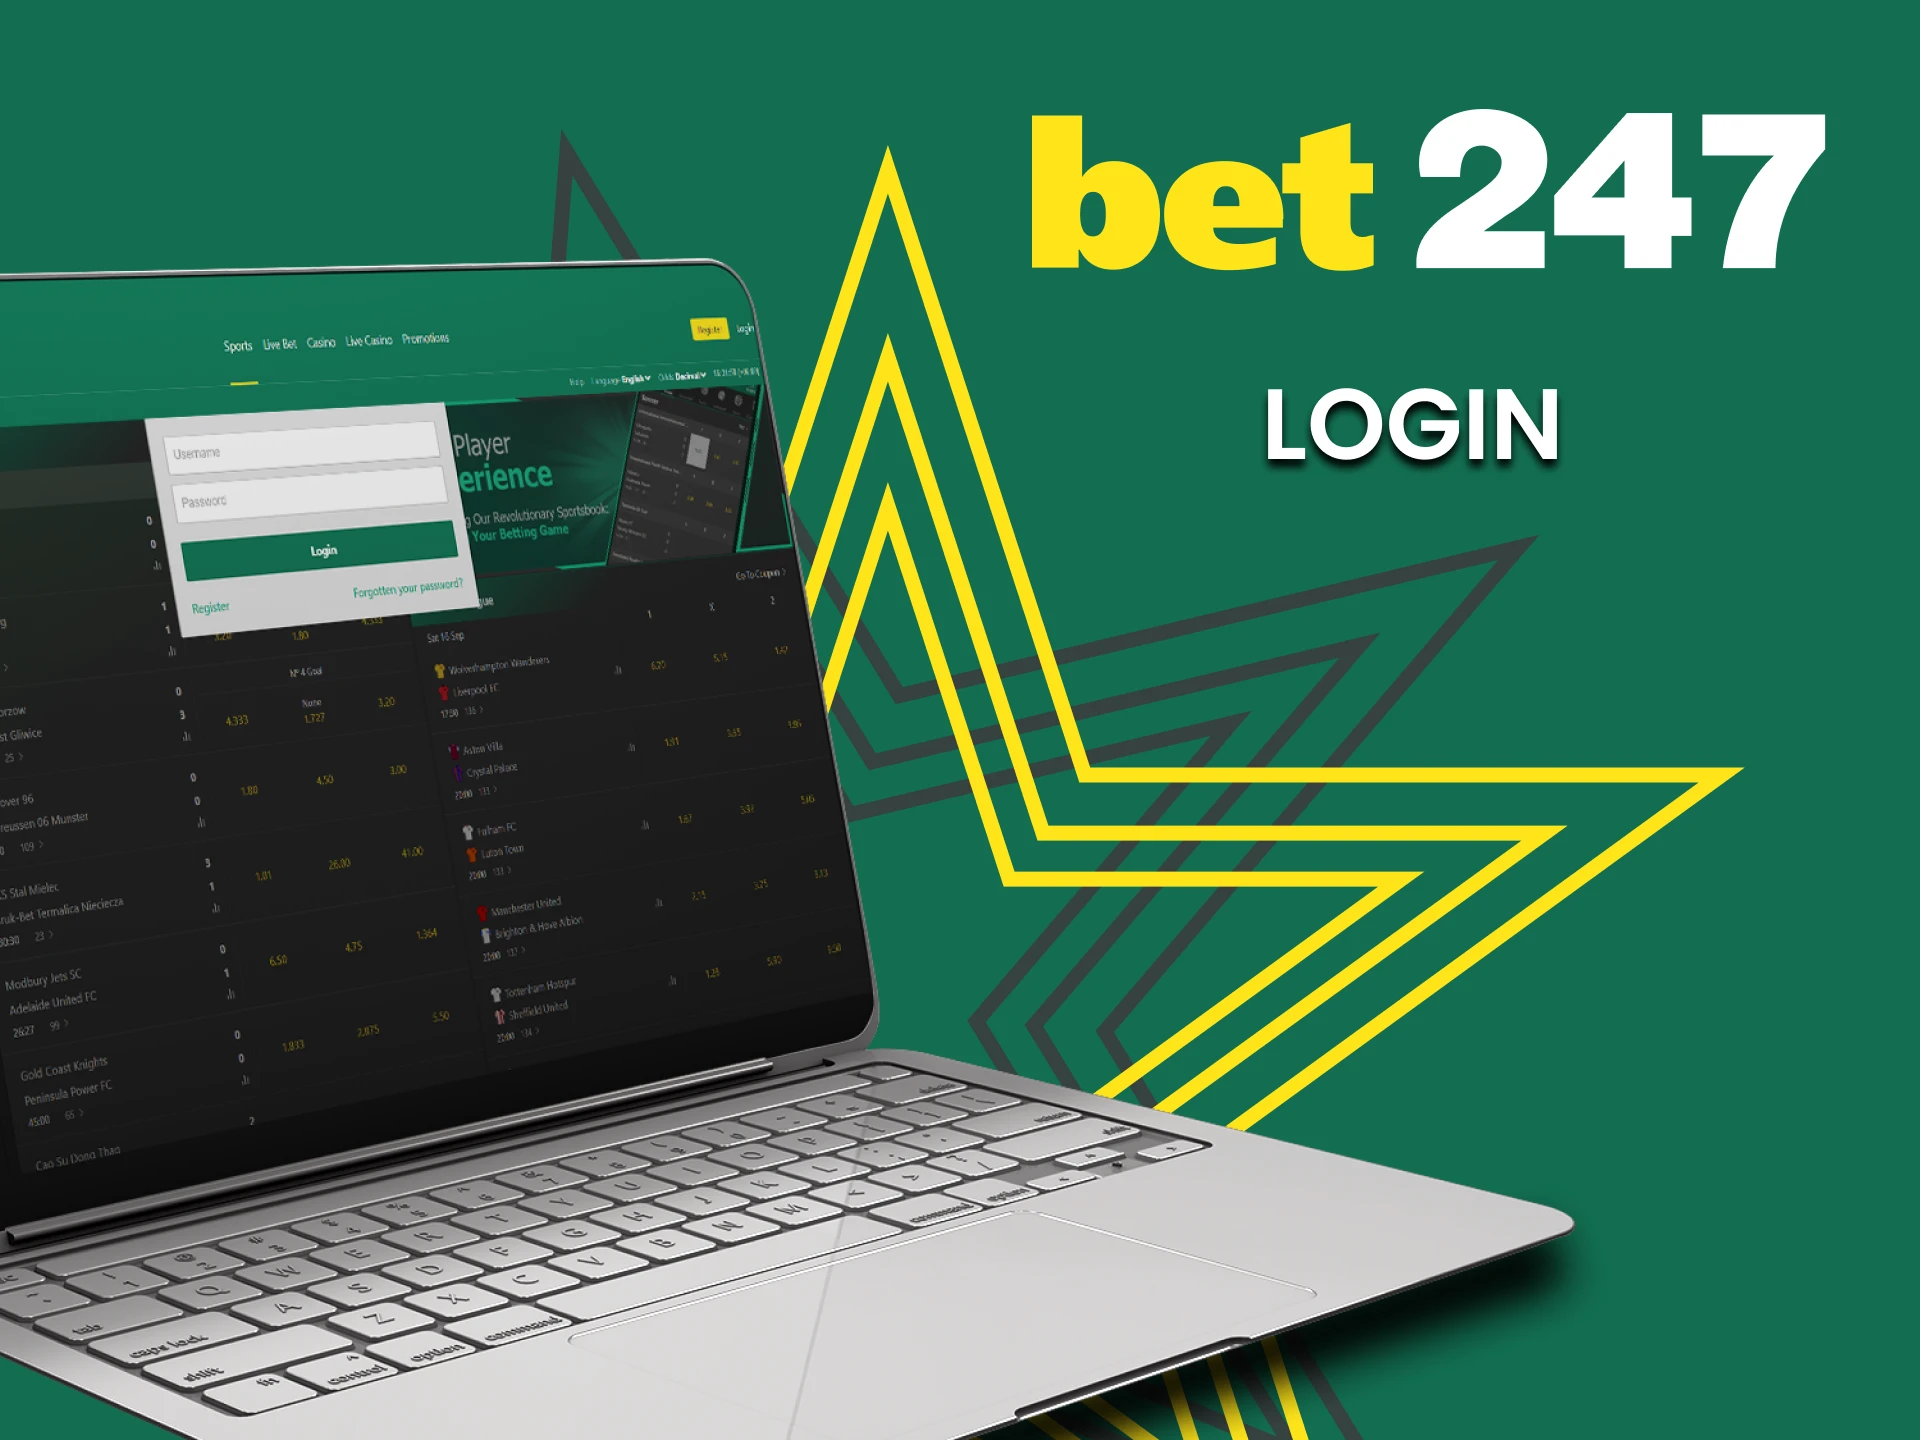 At Bet247, it's easy to log into your account.